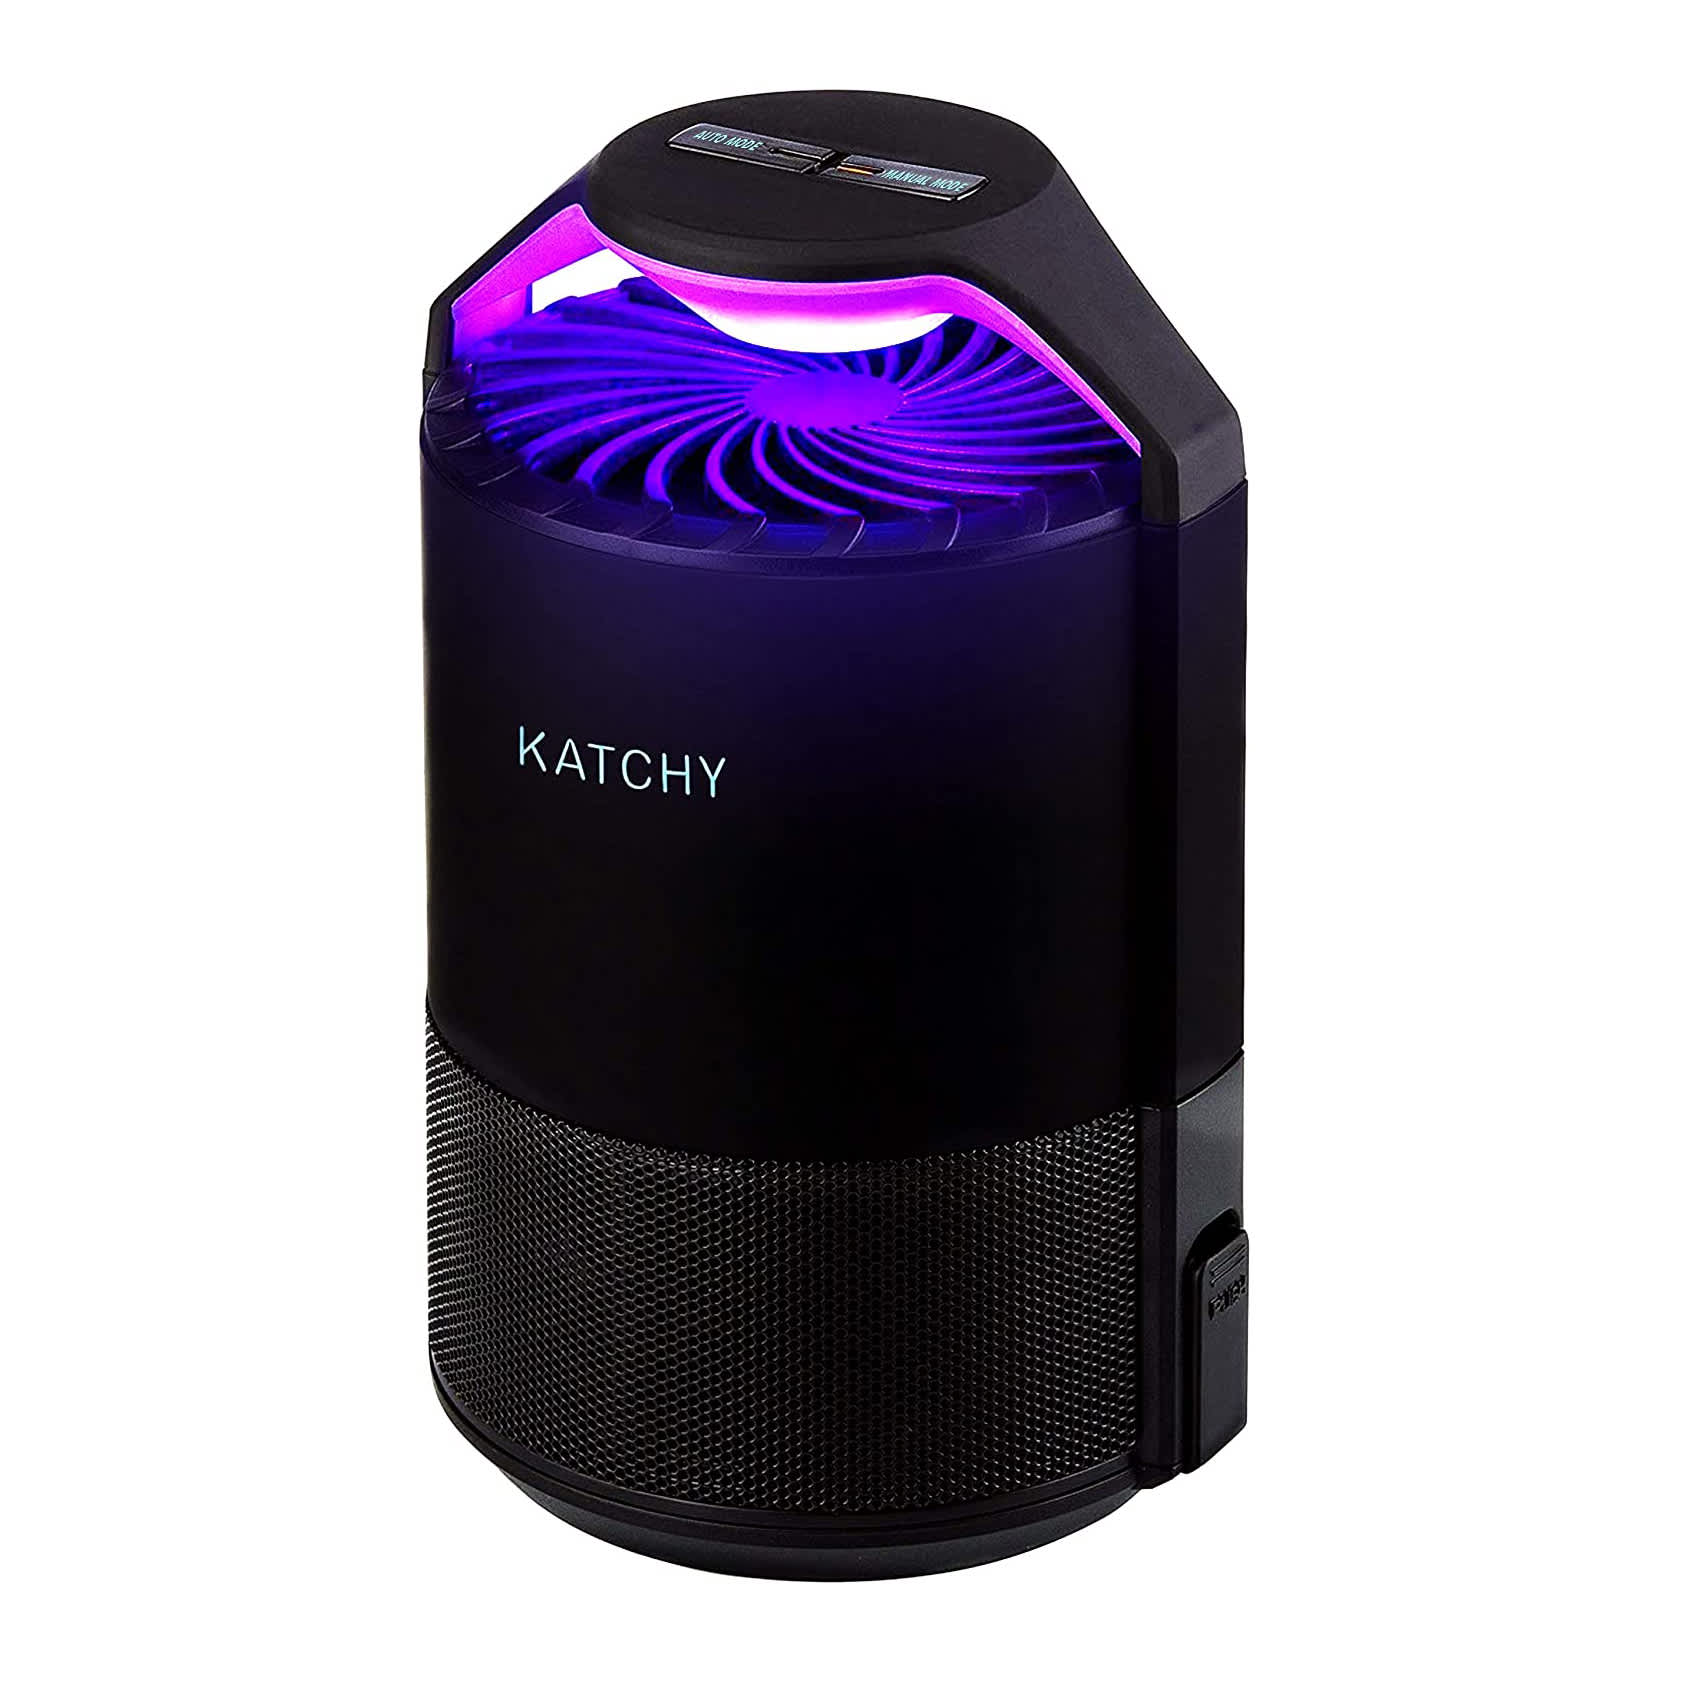 Katchy Indoor Insect Trap - Catcher & Killer for Mosquitos, Gnats, Moths,  Fruit Flies - Non-Zapper Traps for Inside Your Home - Catch Insects Indoors